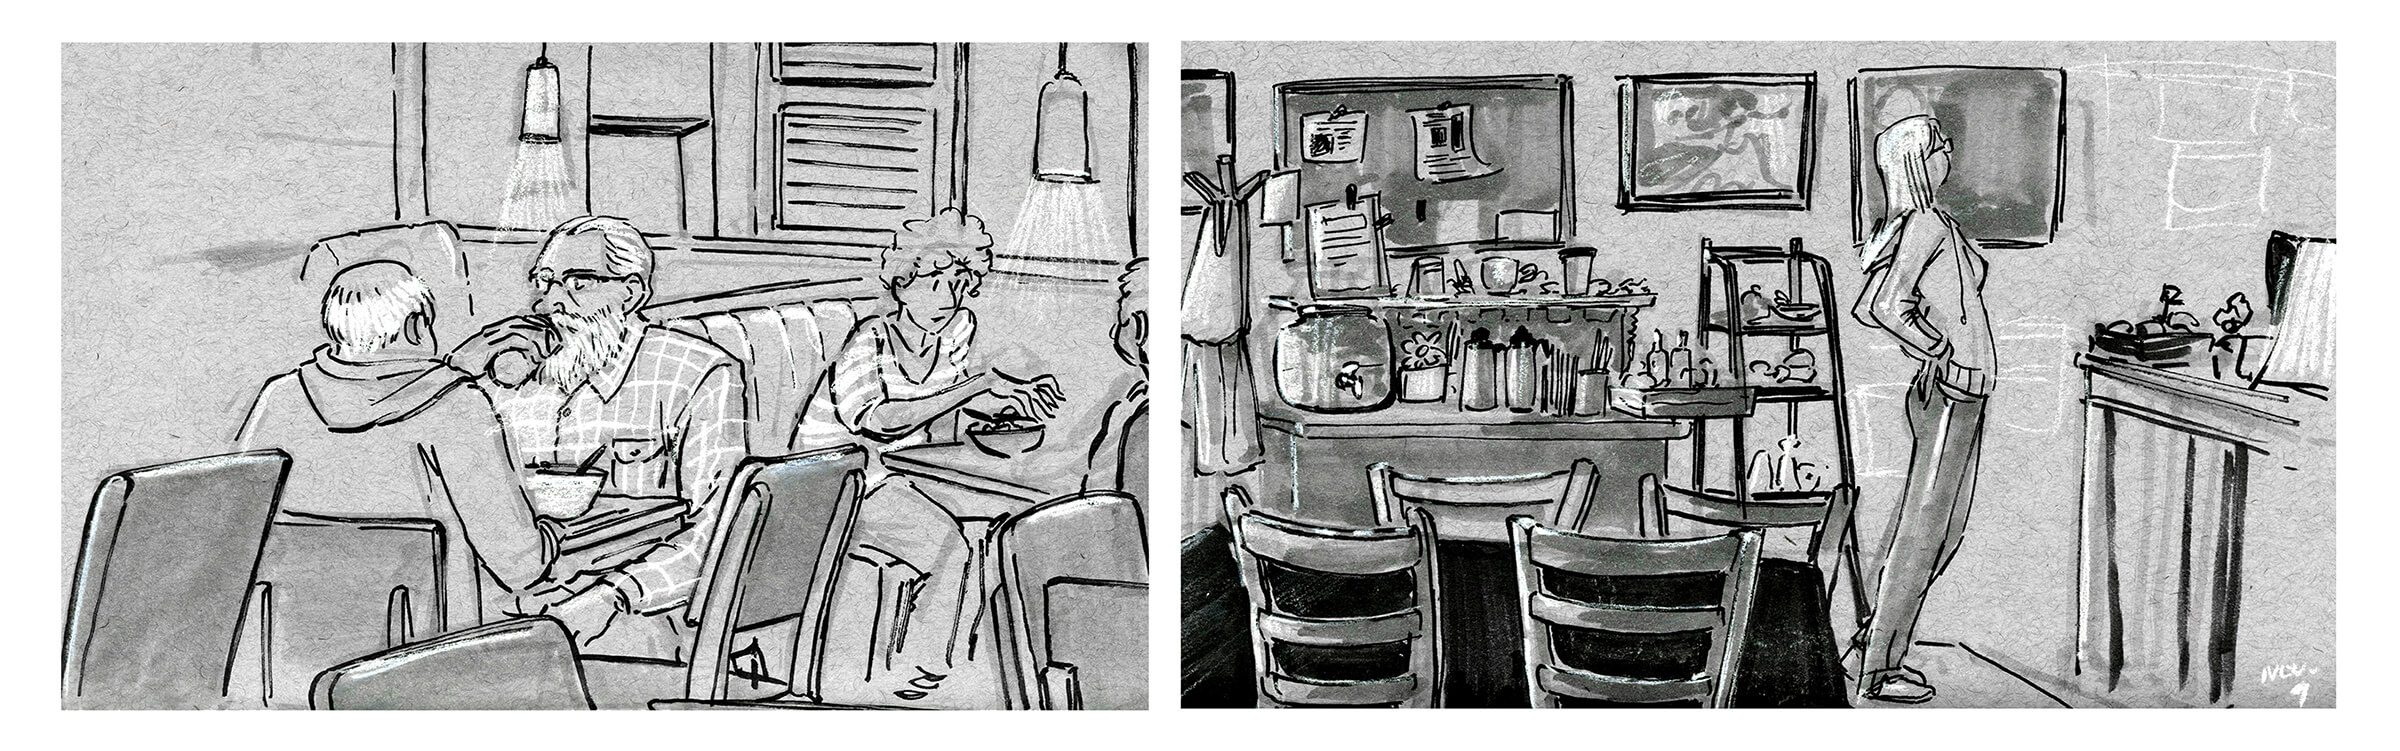 black and white drawings of a coffee shop, featuring patrons drinking coffee and analyzing the menu at the check-out counter